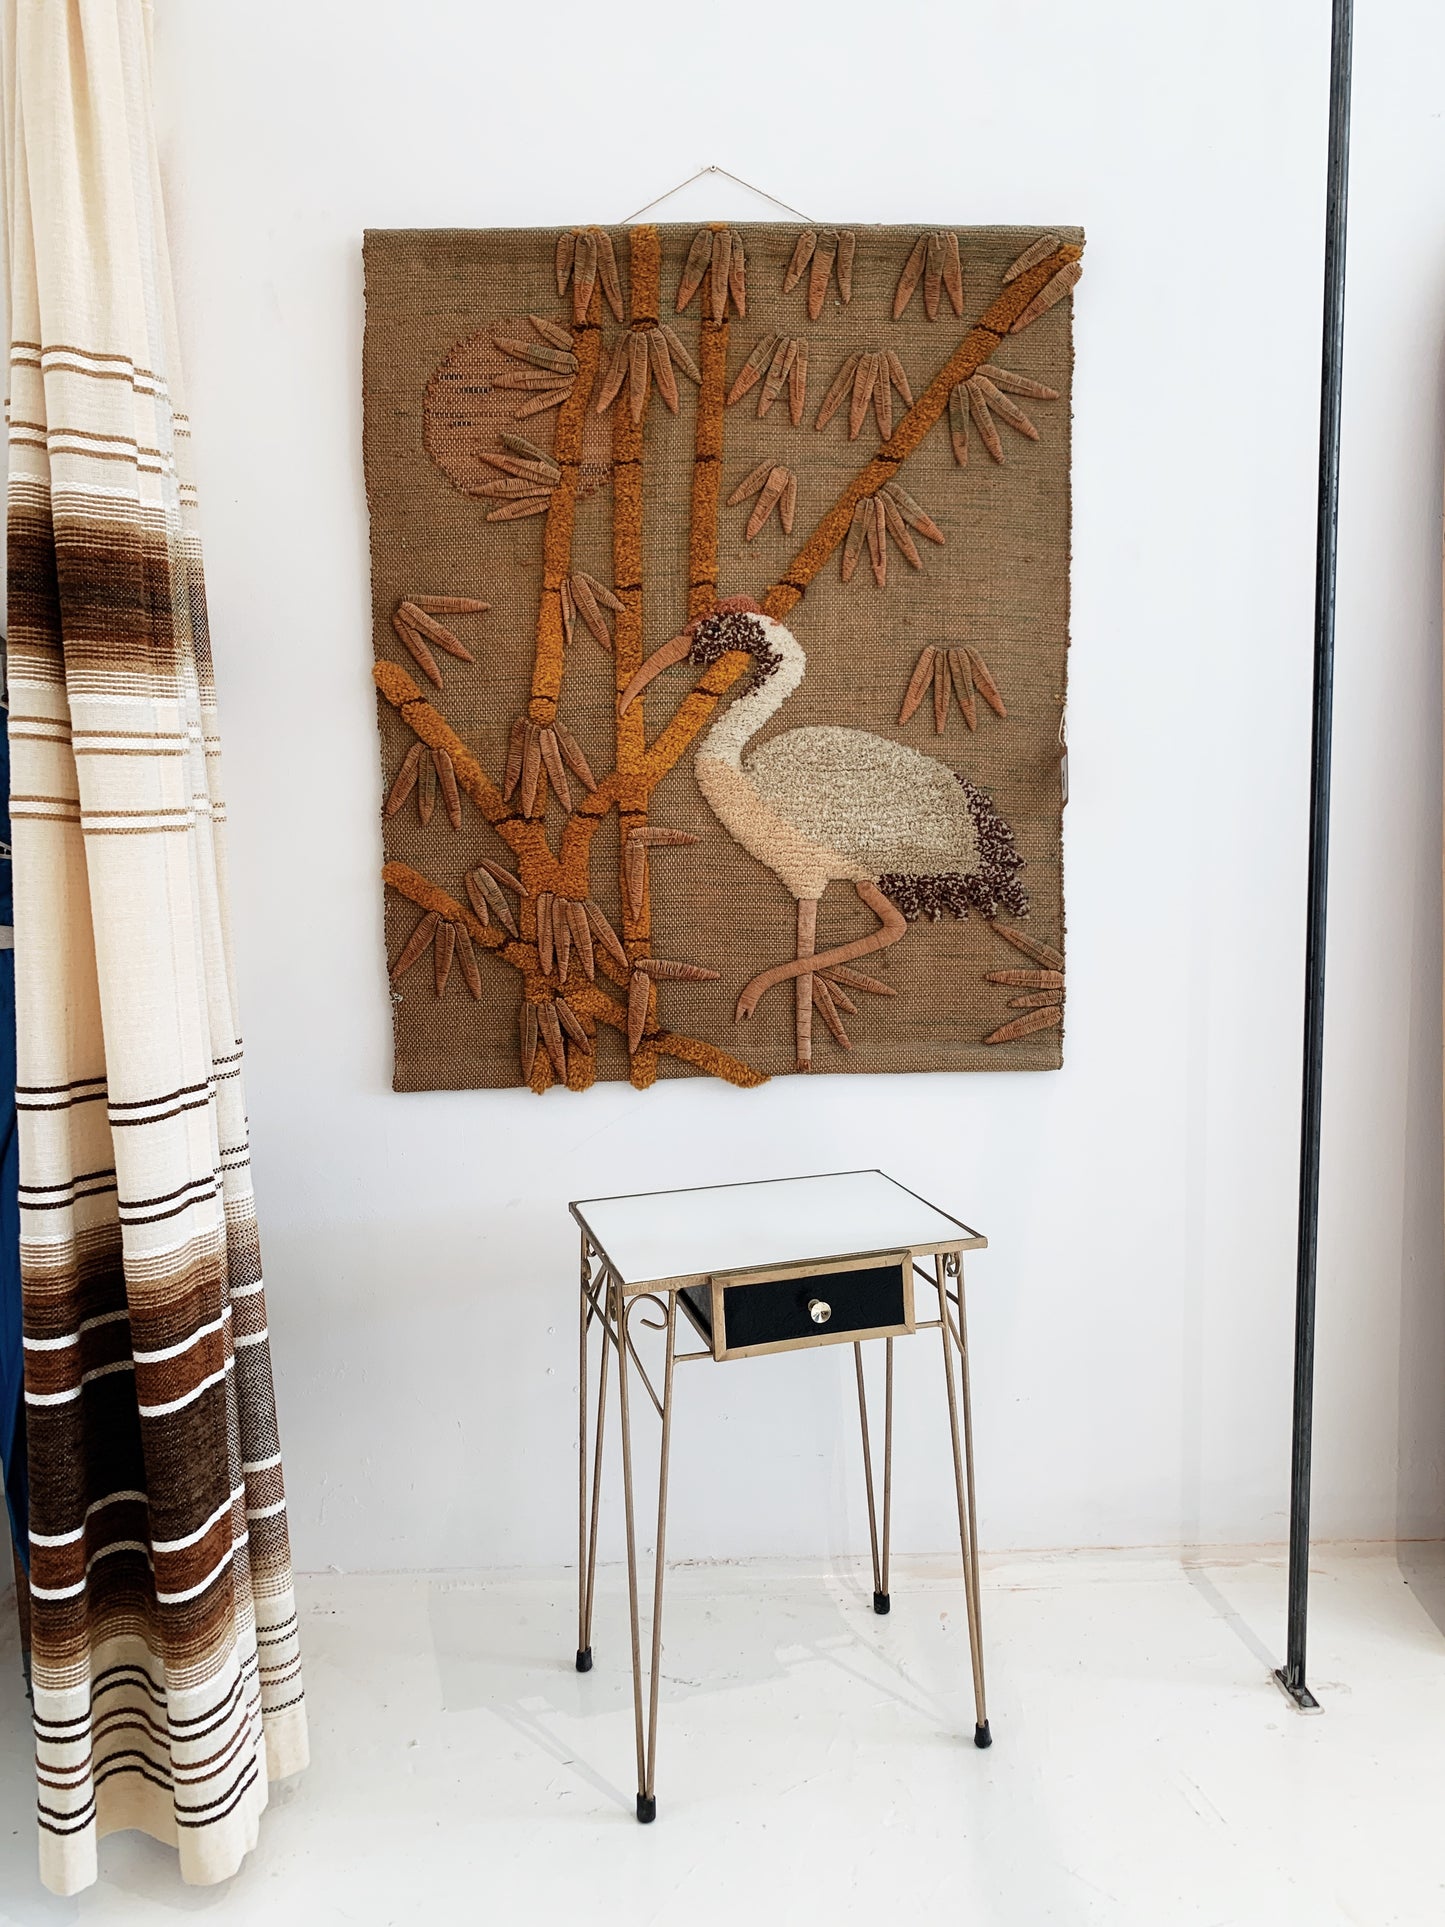 Bamboo Forest Crane Jute Wall Hanging 2.0